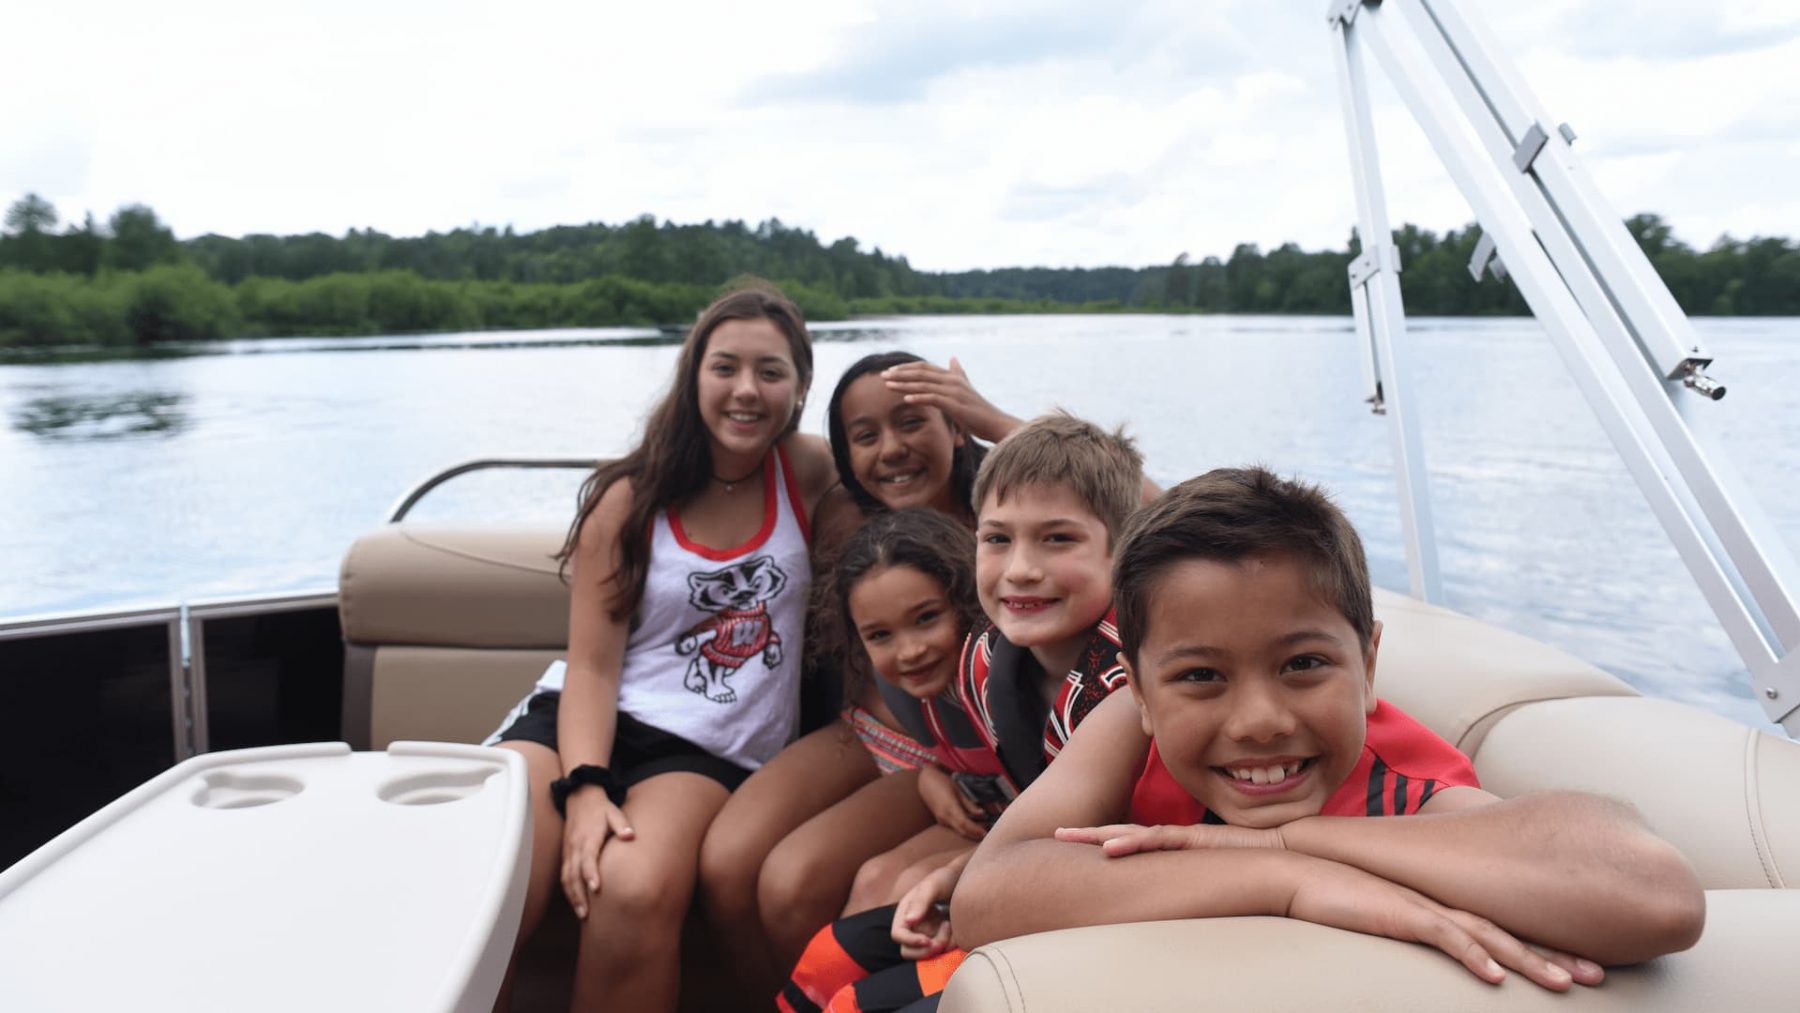 Article: Cruise into a pontoon paradise | Vilas County Wisconsin pontoon boating